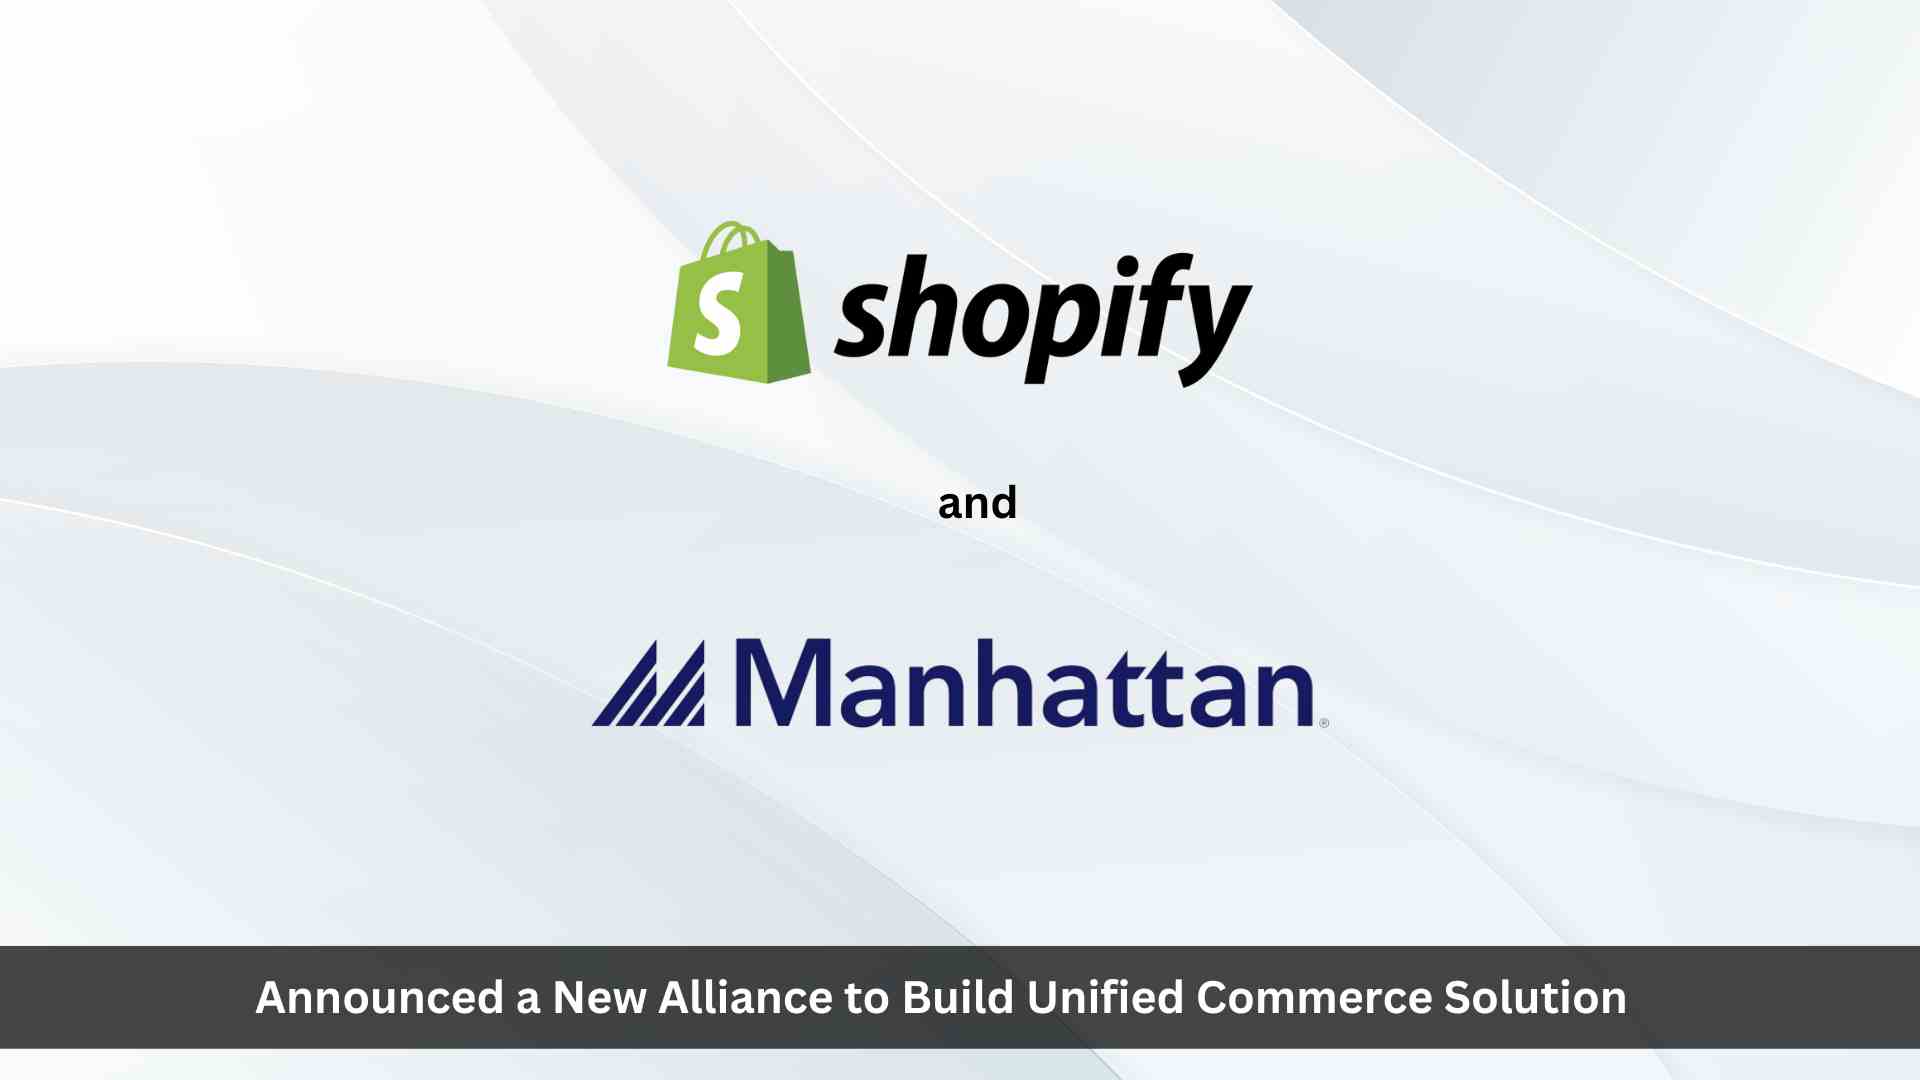 Shopify and Manhattan to Build Unified Commerce Solution